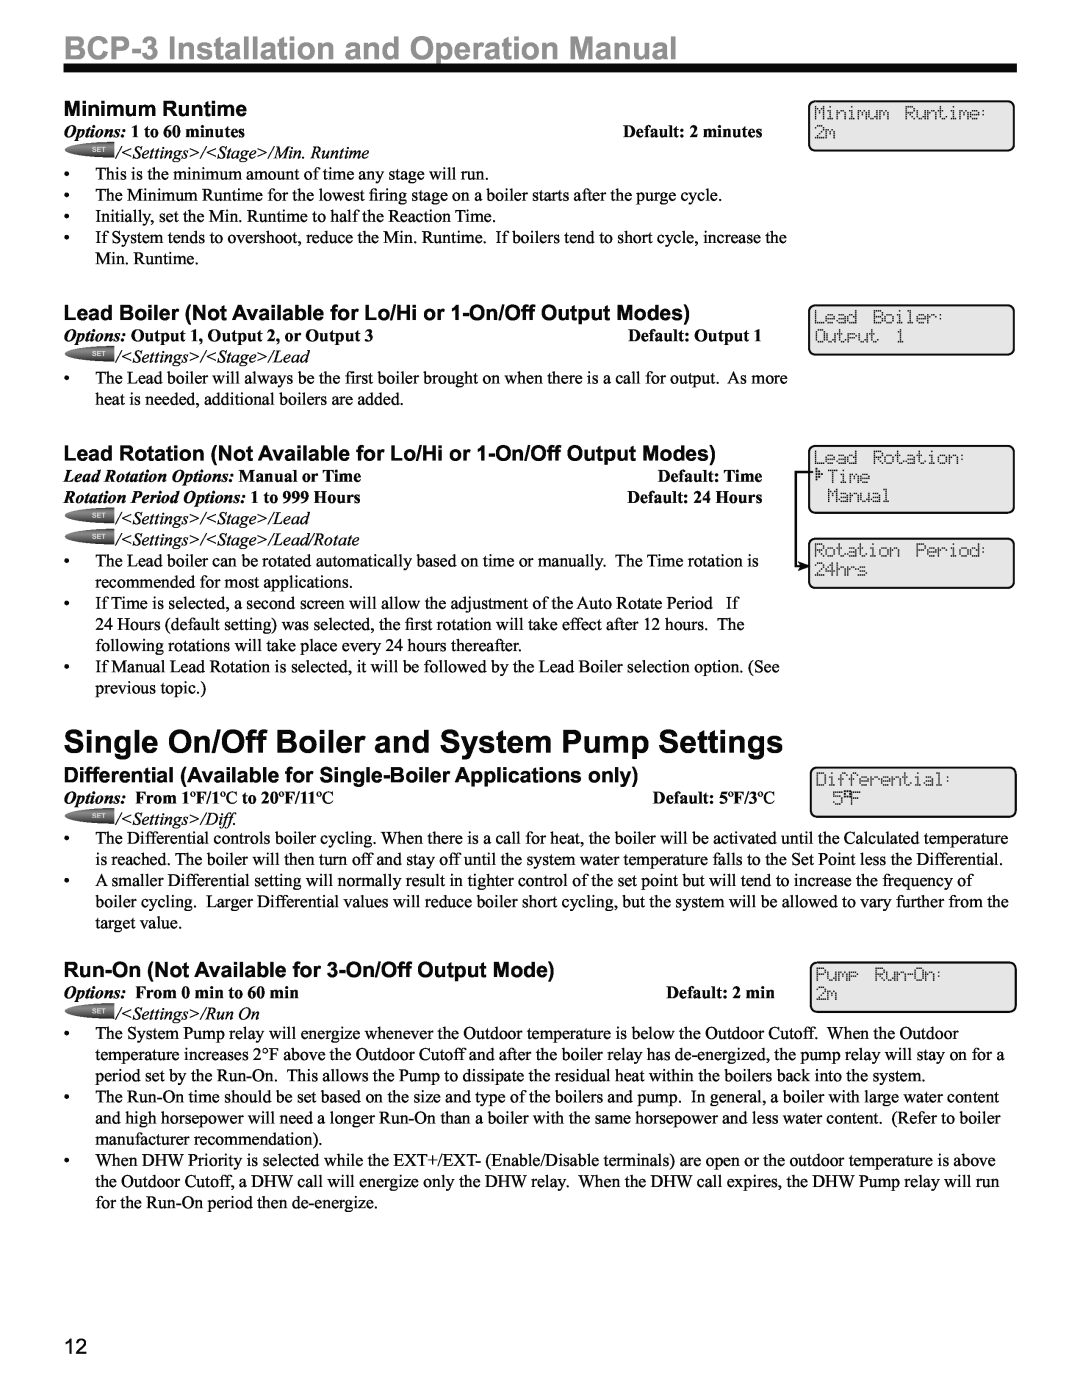 Weil-McLain BCP-3 manual Single On/Off Boiler and System Pump Settings, Run-OnNot Available for 3-On/OffOutput Mode 